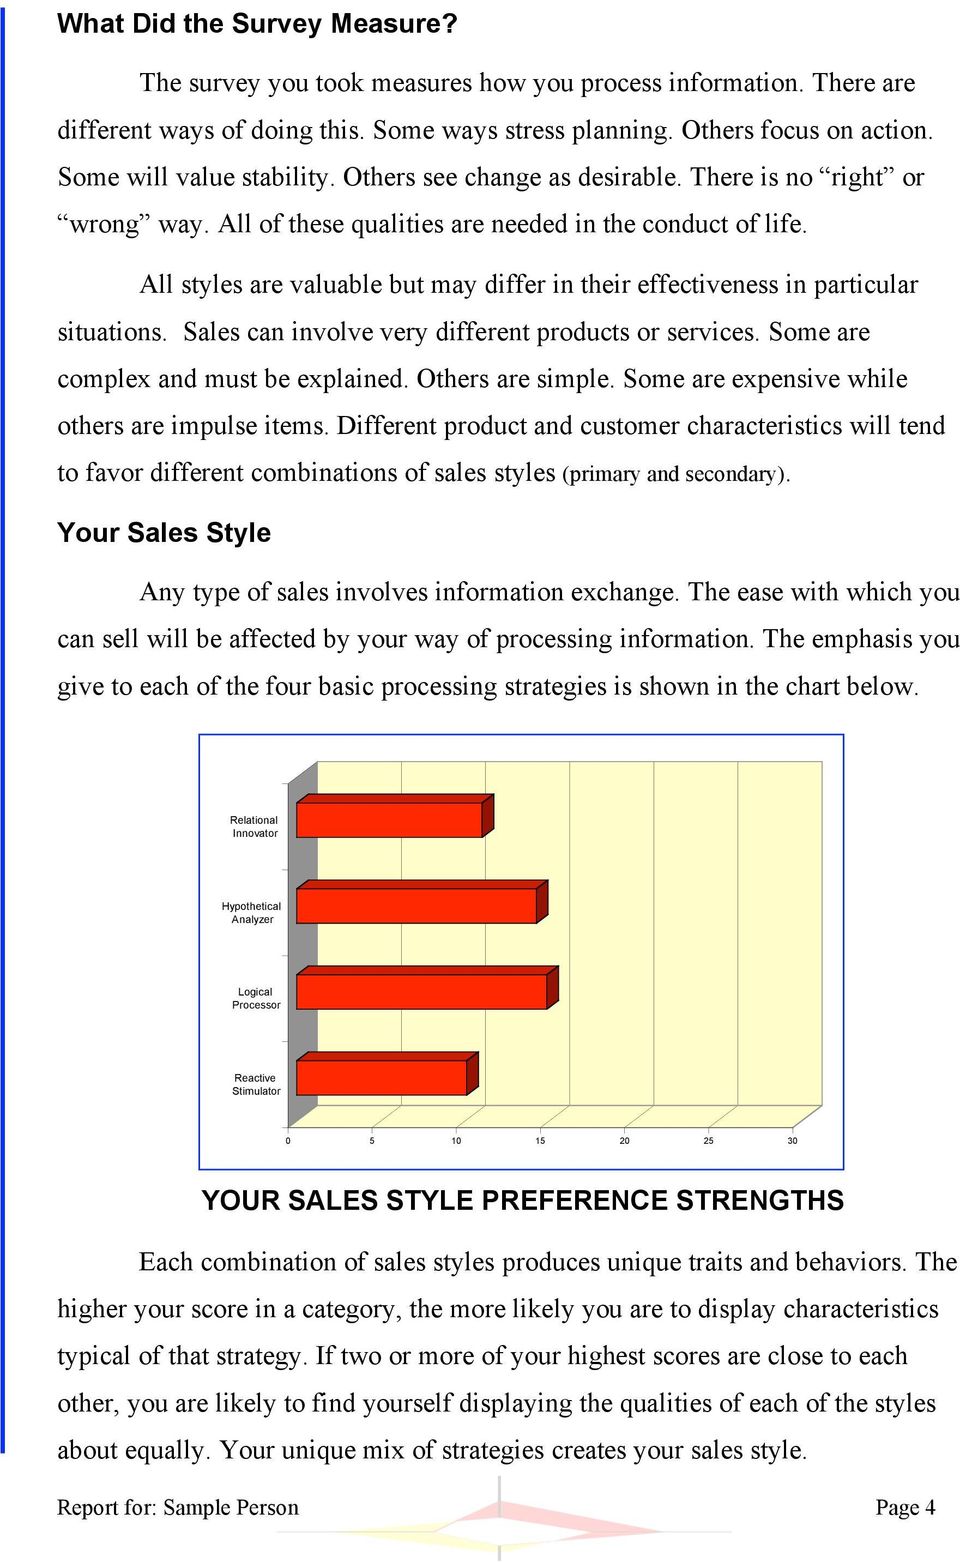 All styles are valuable but may differ in their effectiveness in particular situations. Sales can involve very different products or services. Some are complex and must be explained.